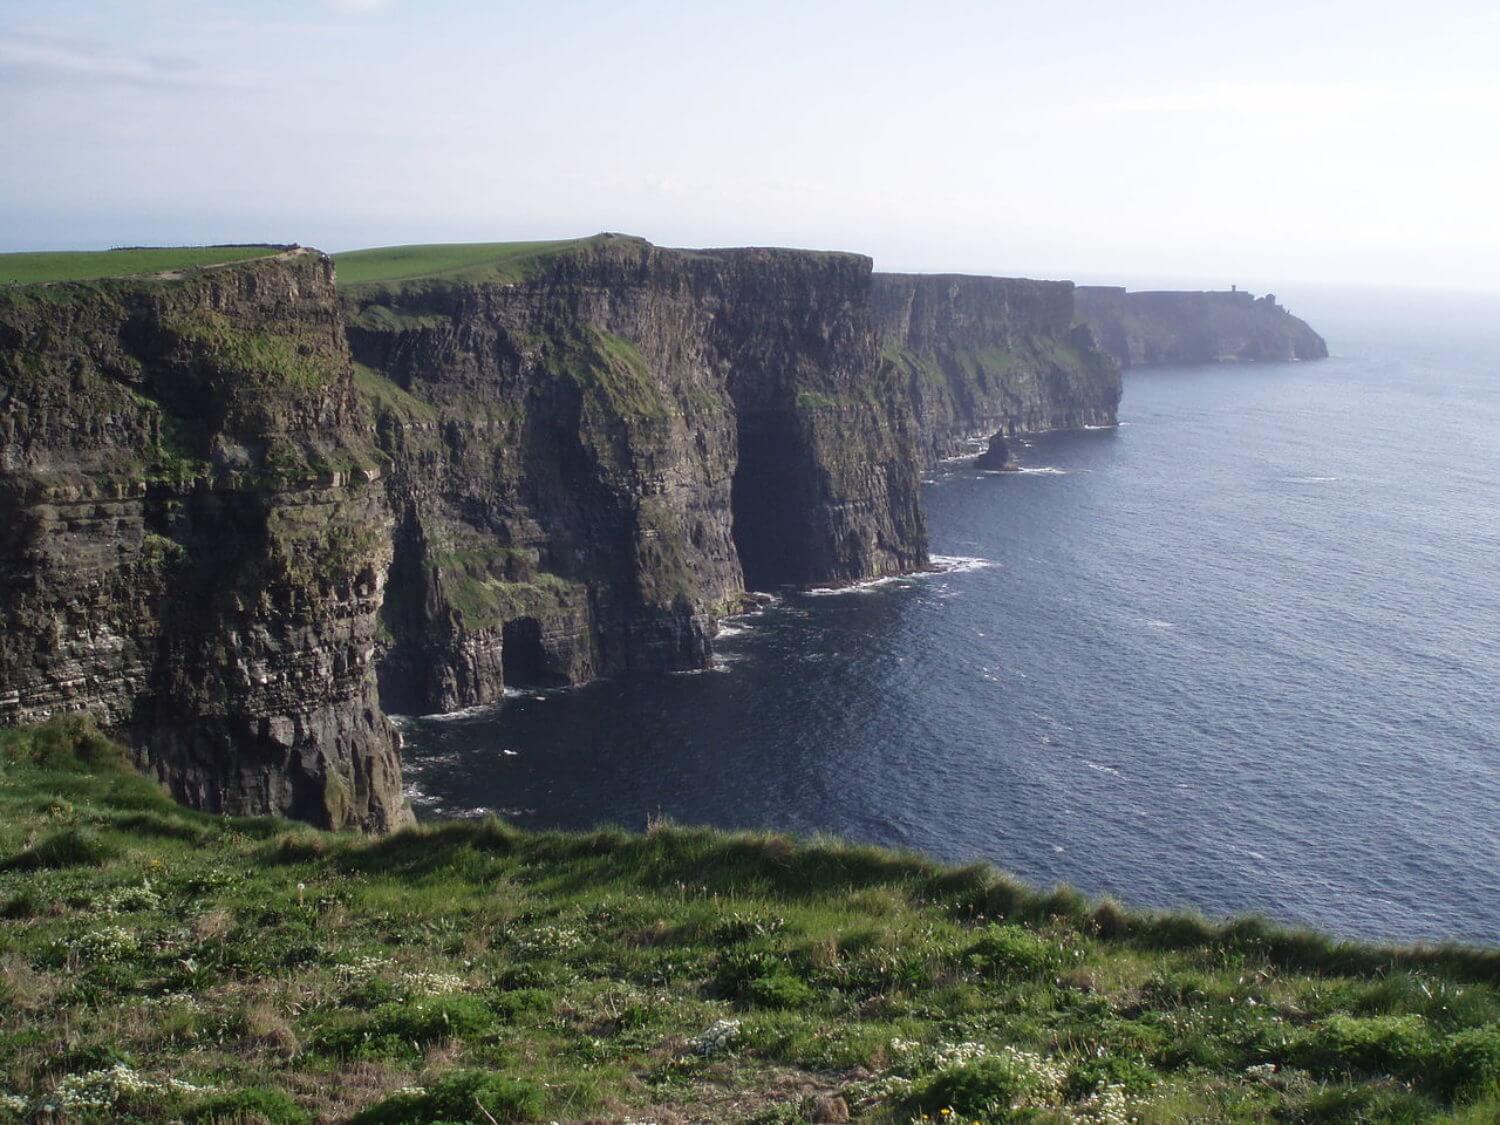 Cliffs of Moher - Photo Wikimedia Commons by Lionel Baur